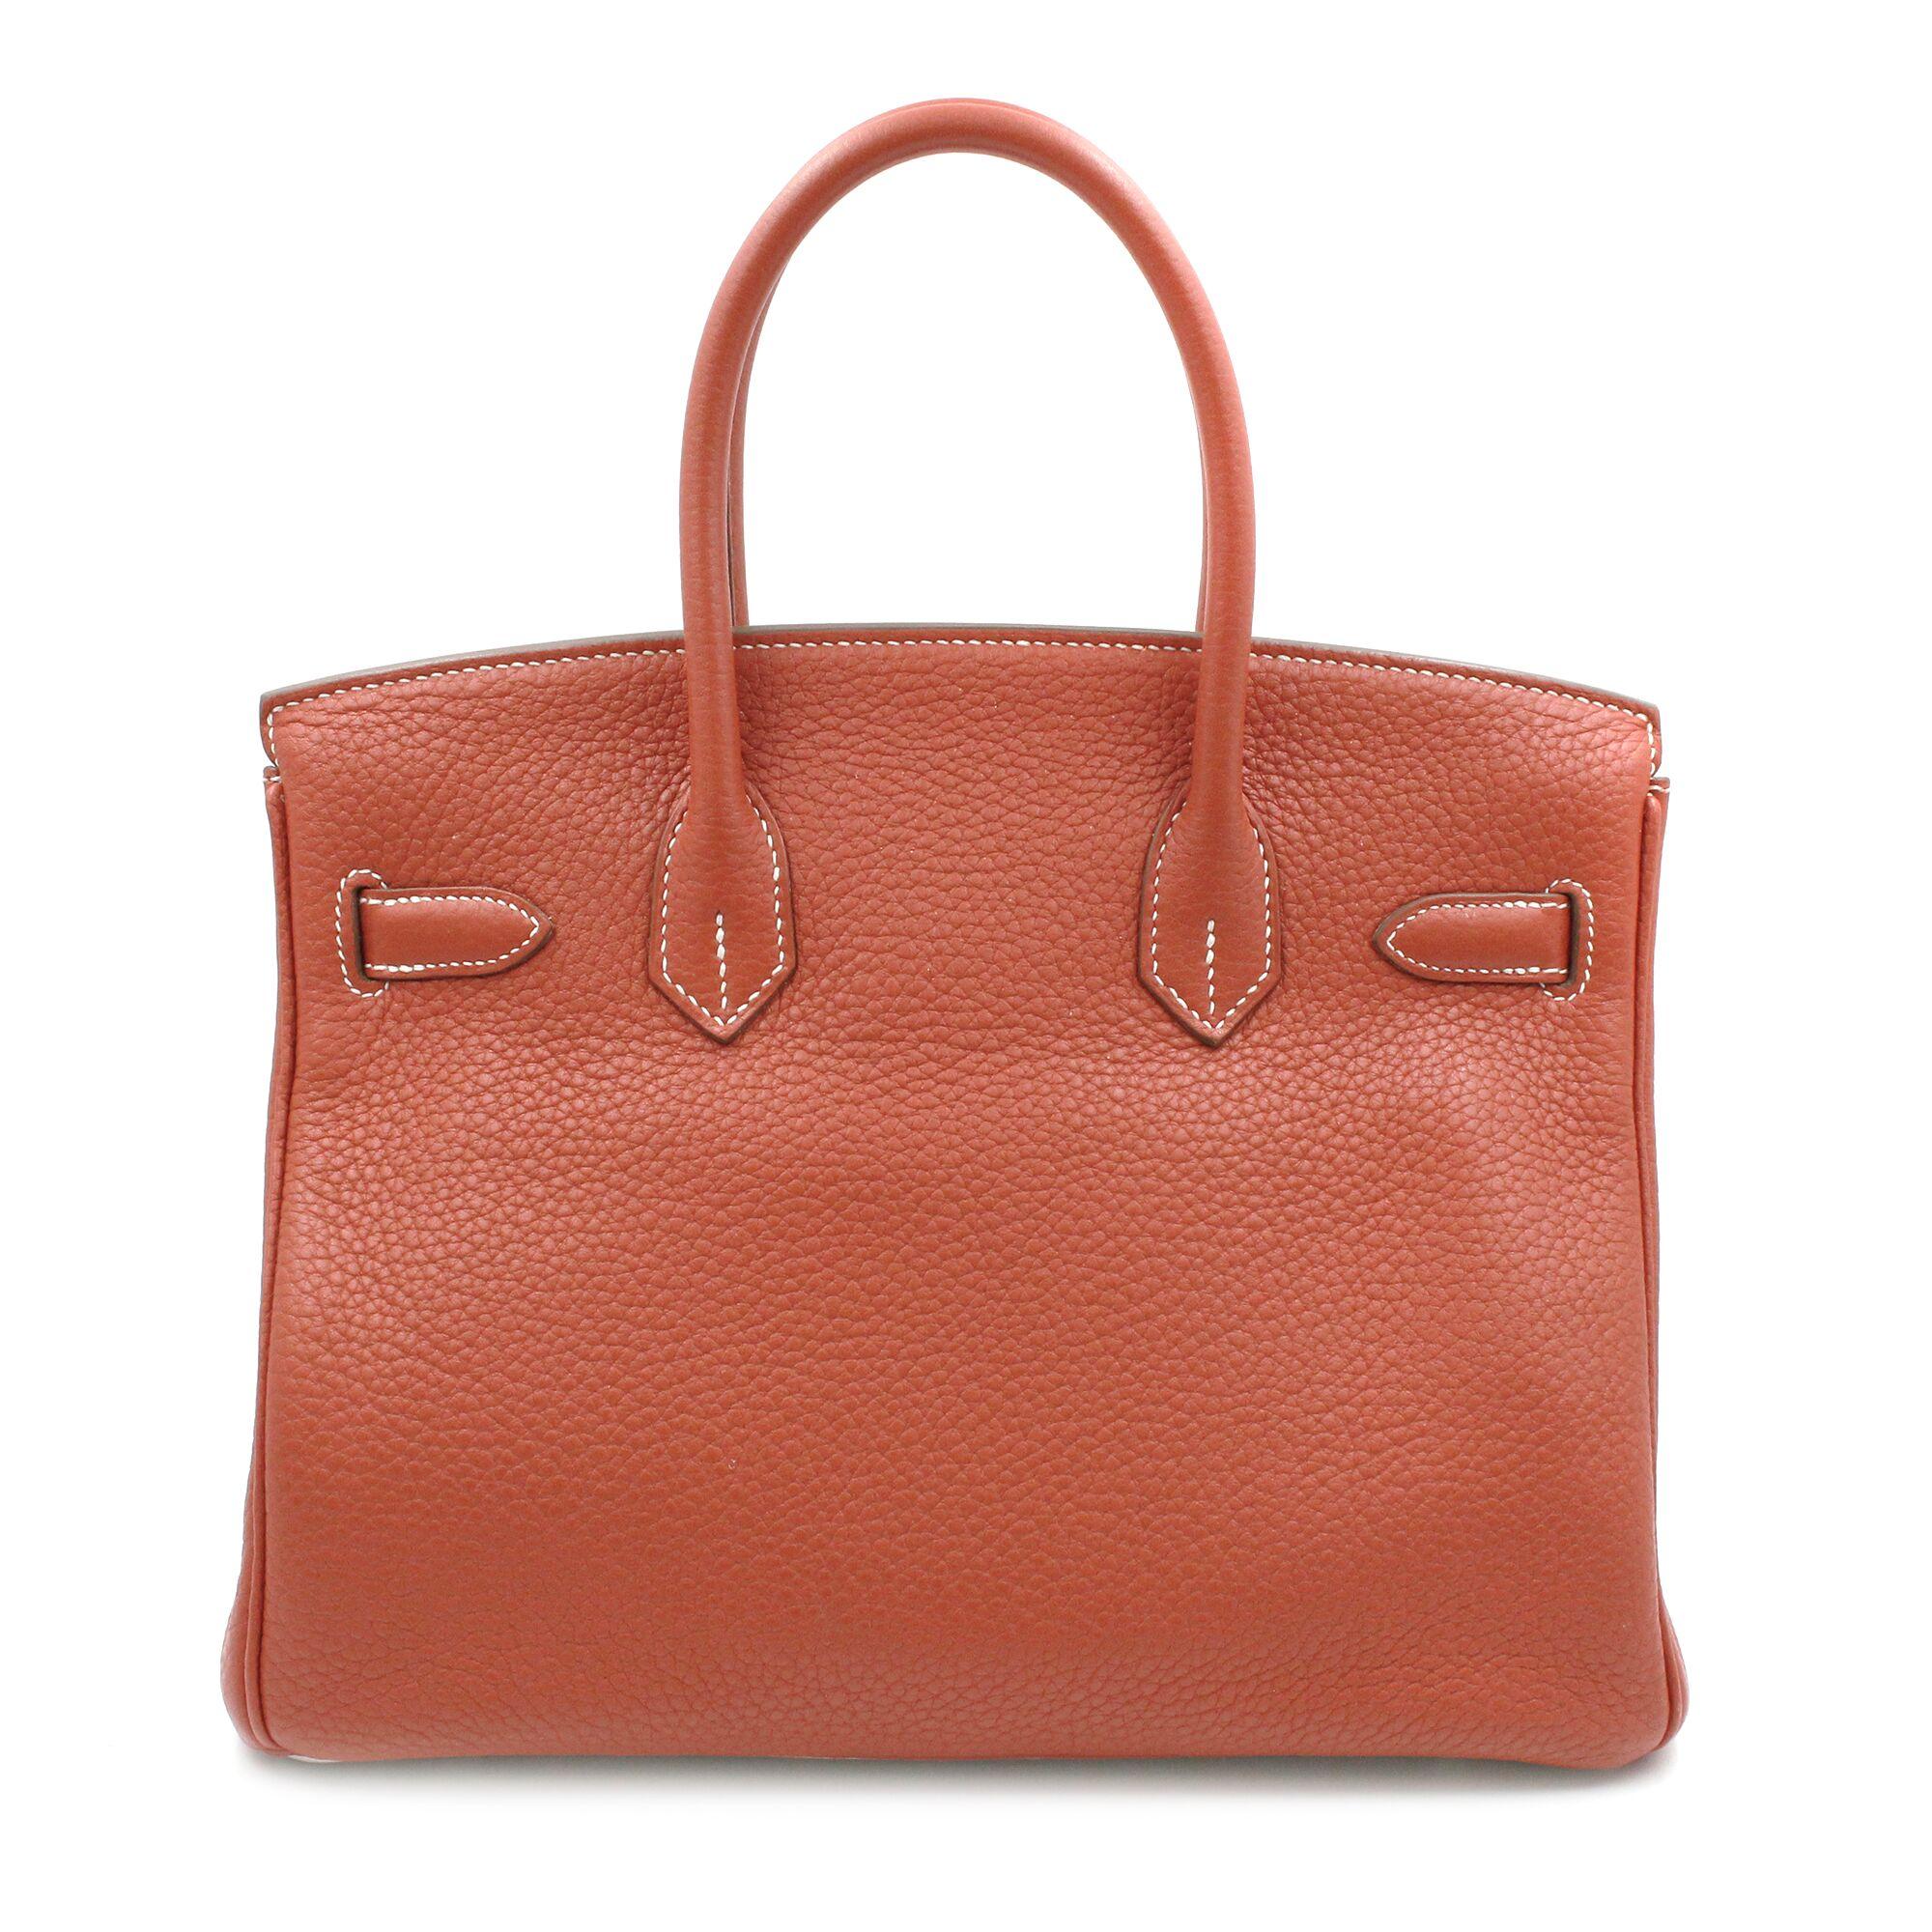 A gorgeous in excellent condition Hermes Eclat Birkin 30 Sanguine and White Clemence with Silver Hardware. This bag is crafted with sturdy, scratch-resistant clemence leather, dual-rolled top handles, a frontal flap, protective base studs, white